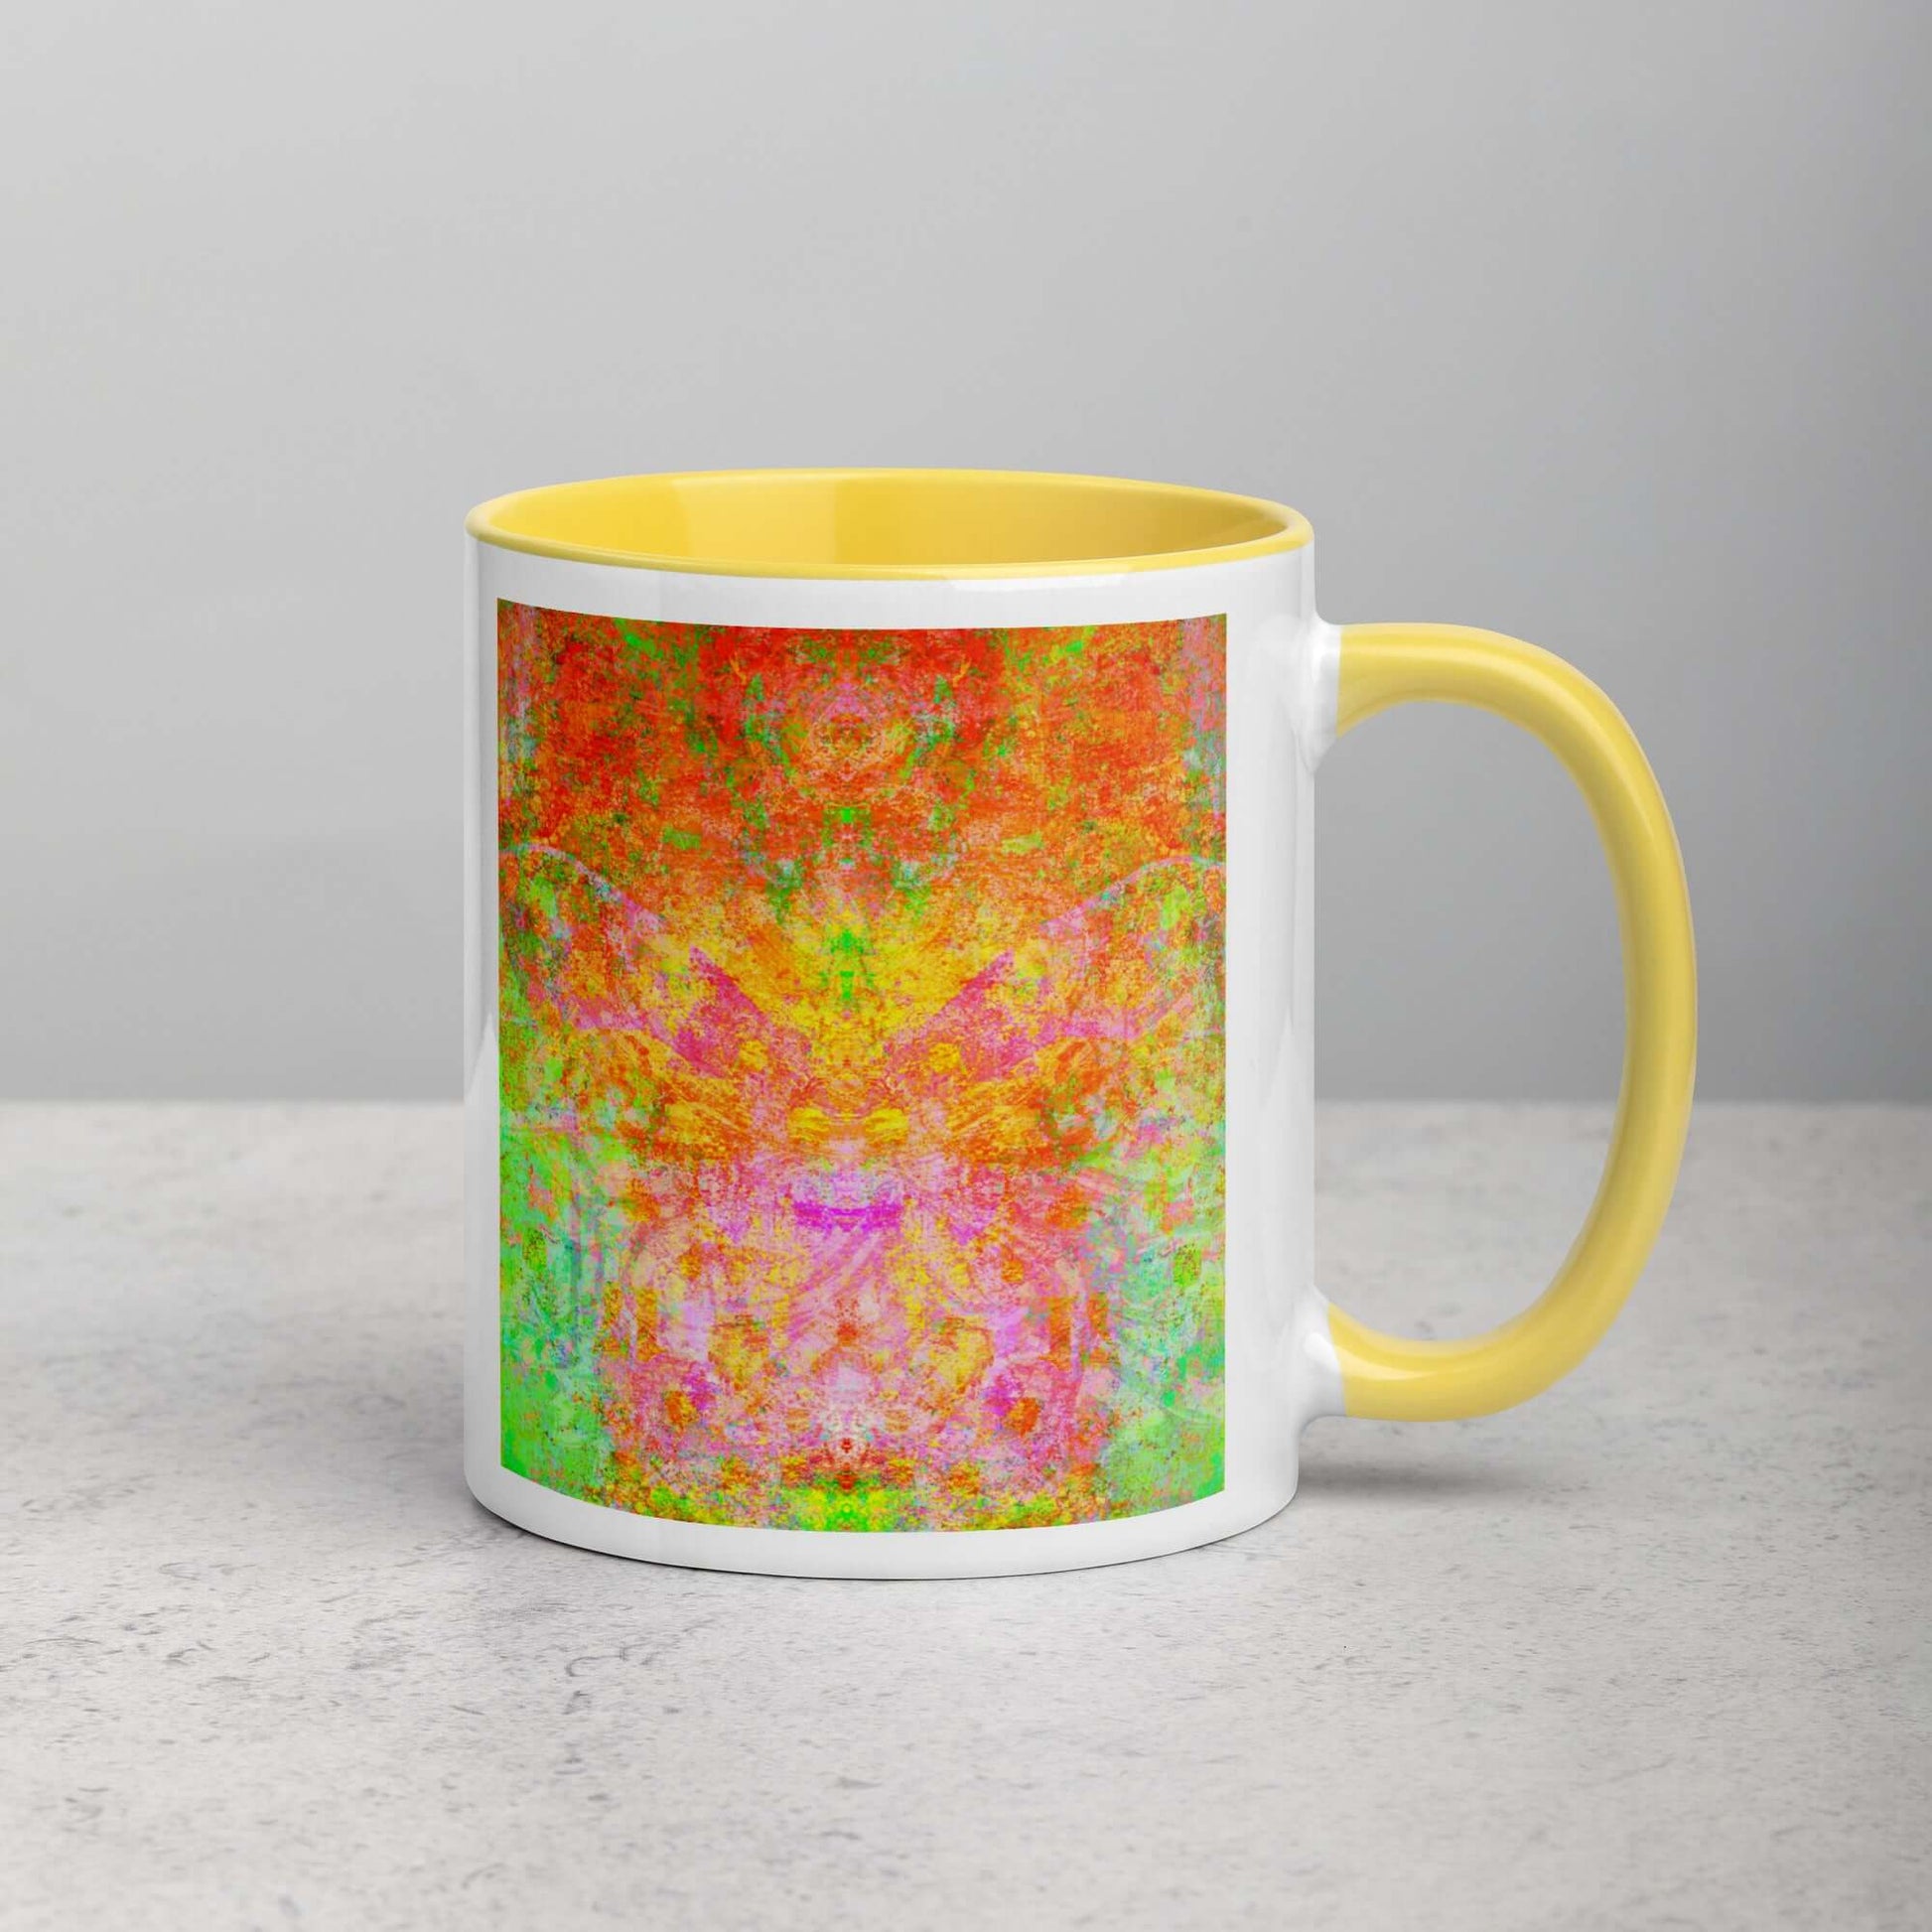 Green and Orange Butterfly Shaped “Firefly” Abstract Art Mug with Bright Yellow Color Inside Right Handed Front View